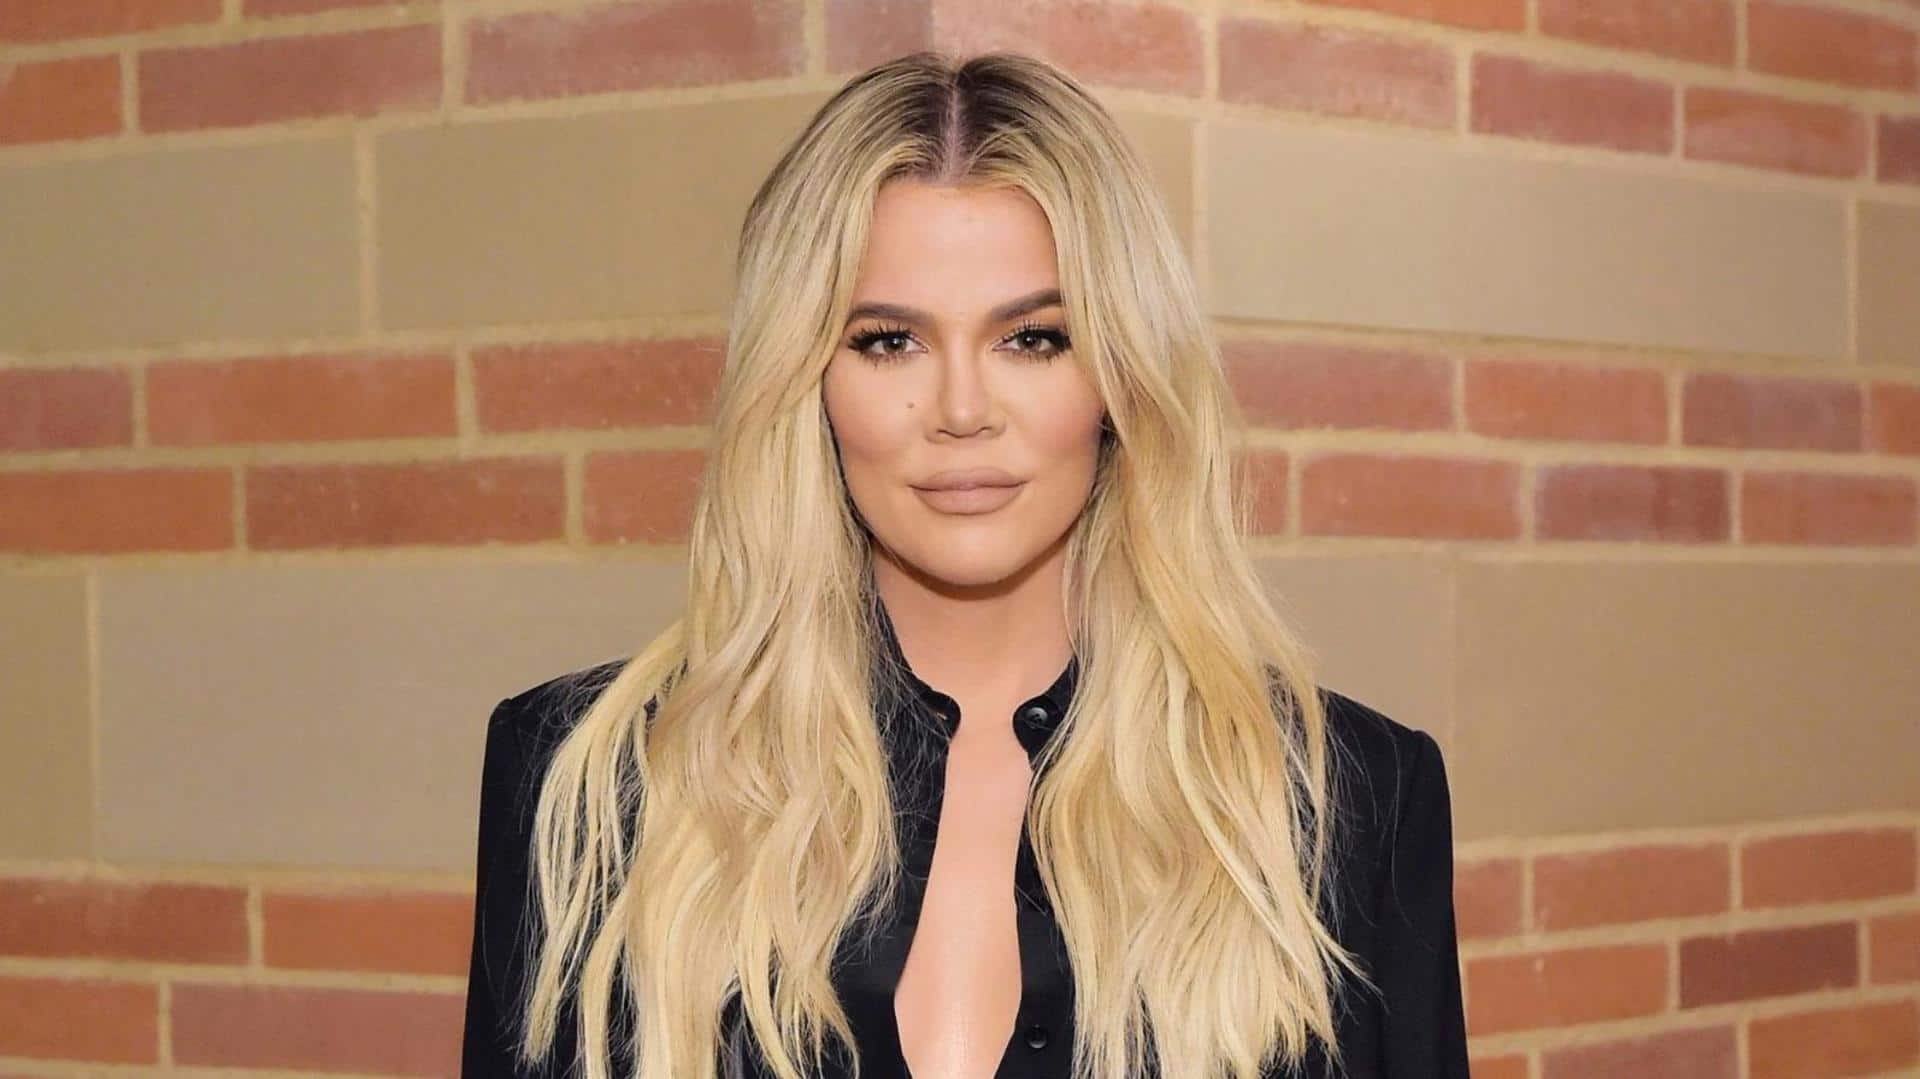 Khloe Kardashian faces lawsuit for 'wrongfully terminating' former household assistant